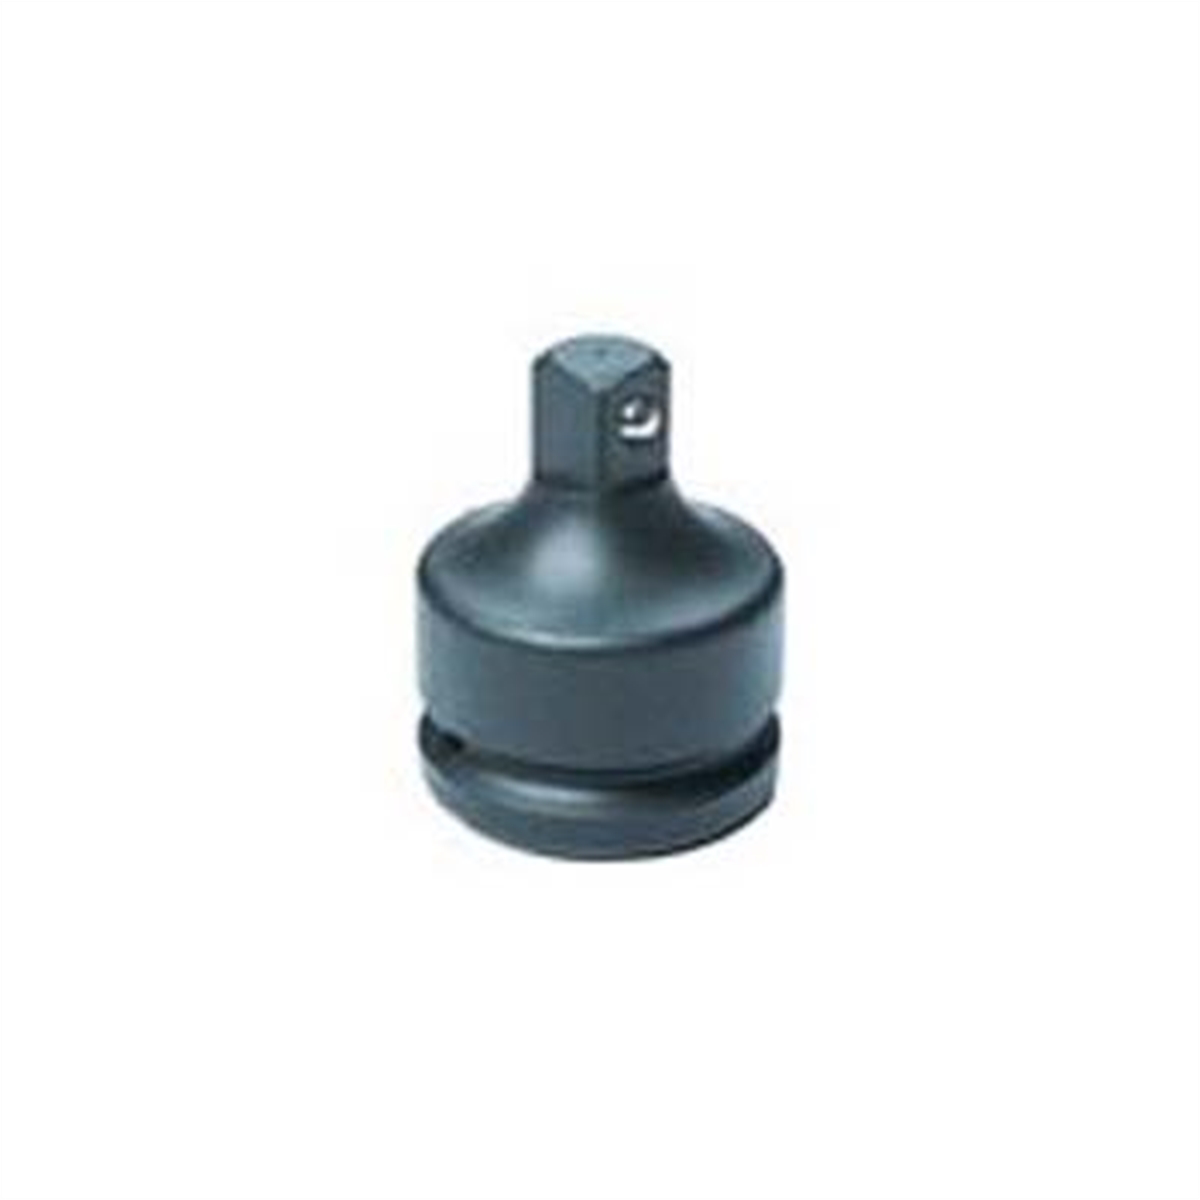 3/4 Inch Female x 1 Inch Male Adapter w/ Friction ...